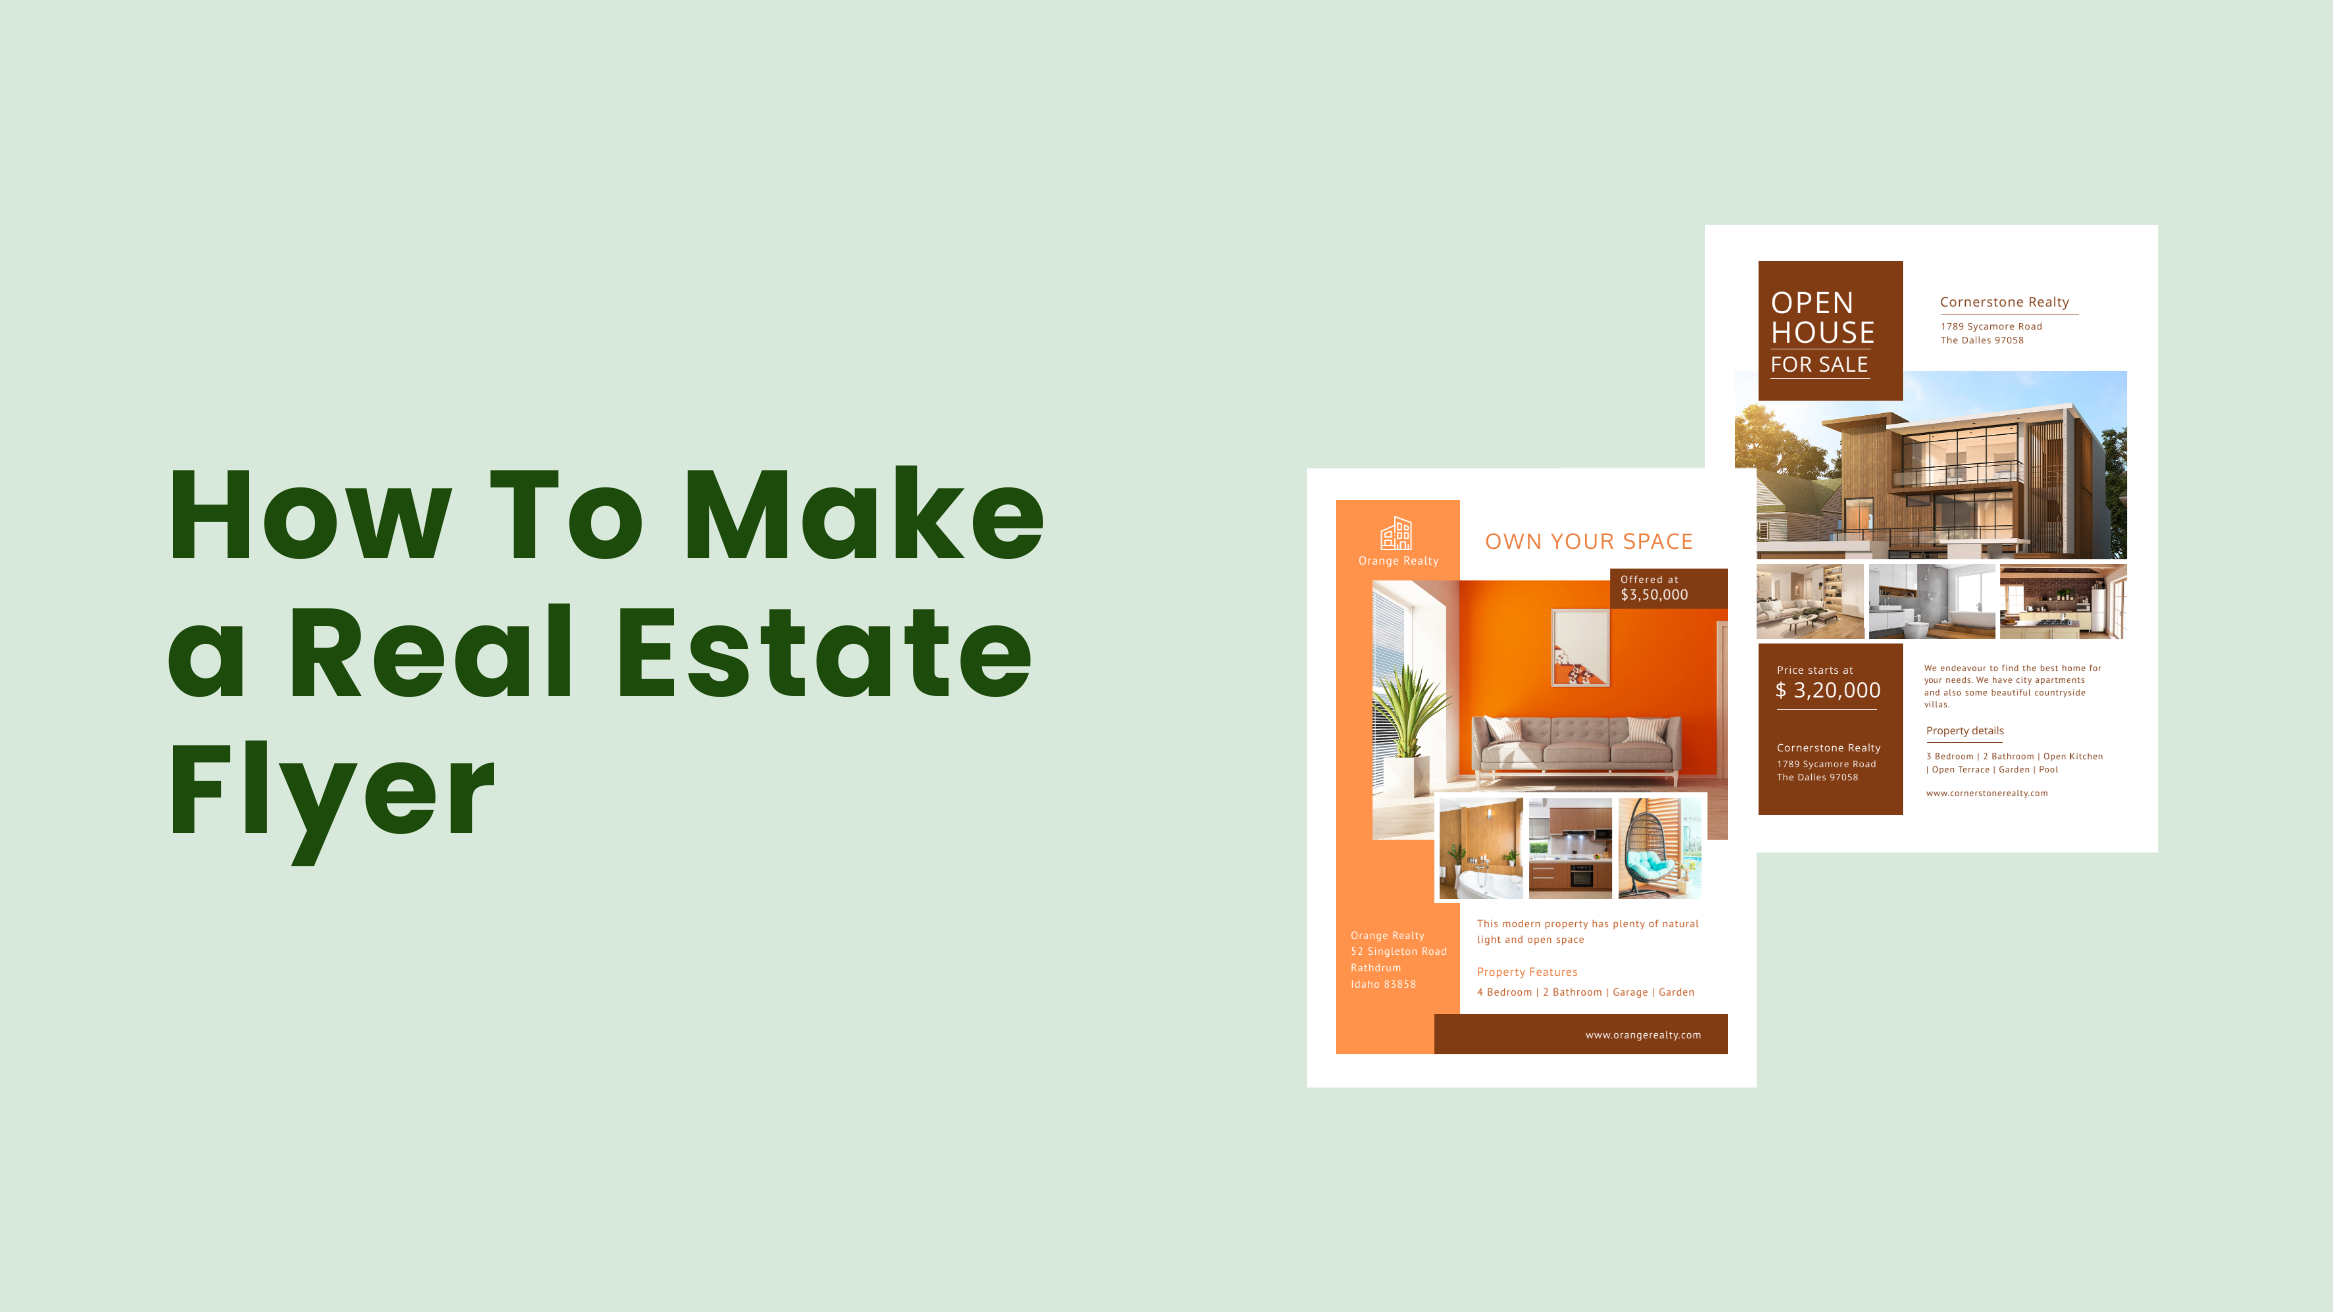 How To Make a Real Estate Flyer